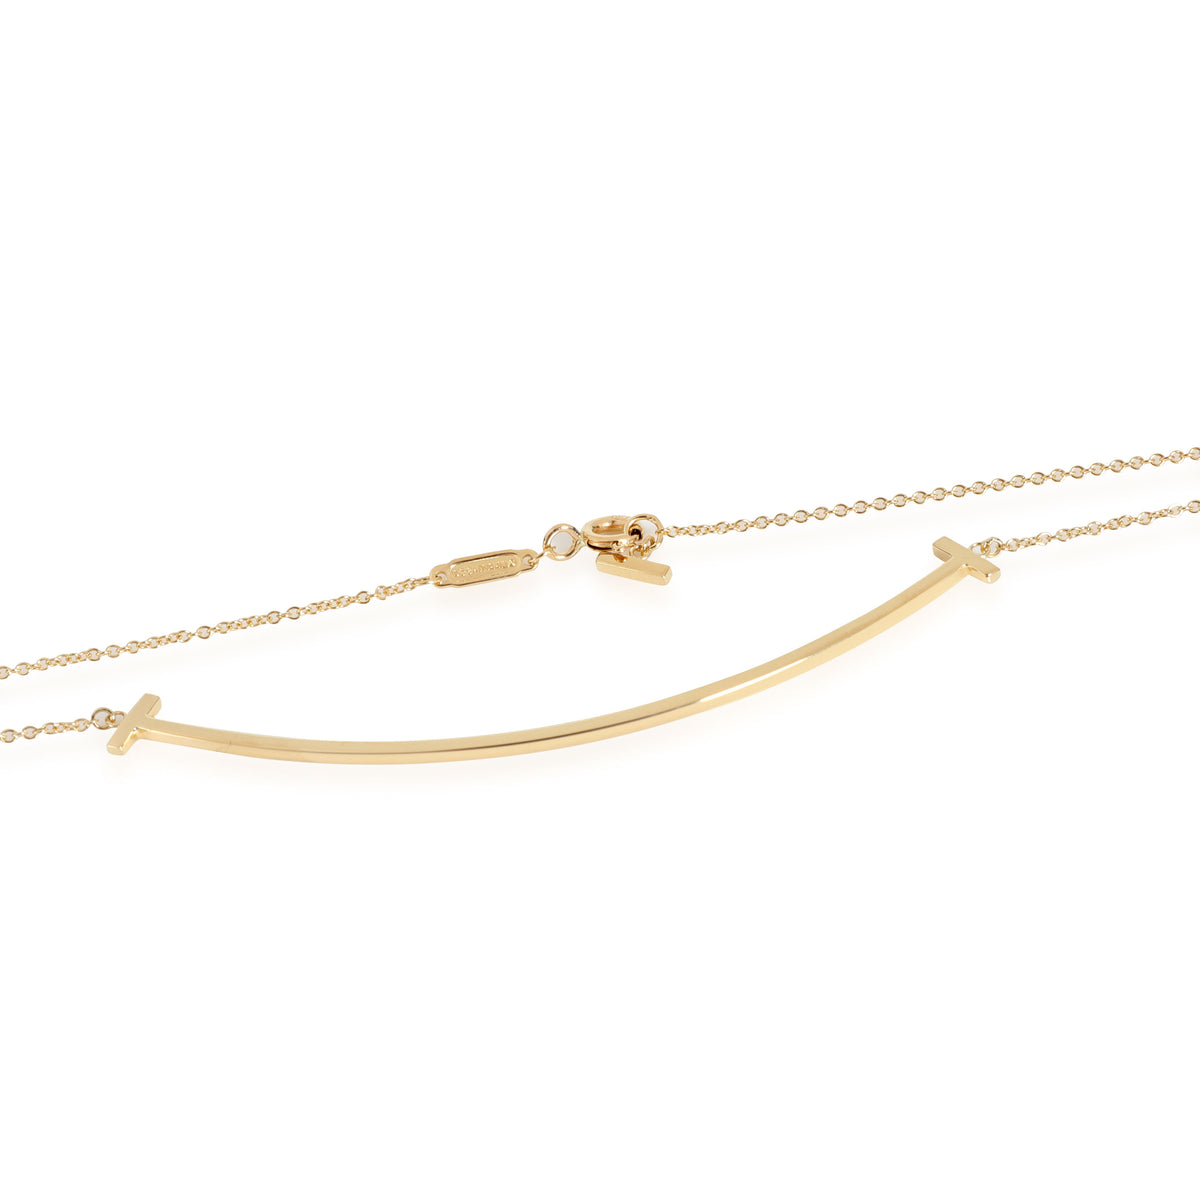 Tiffany & Co. Tiffany T Smile Necklace in 18k Yellow Gold